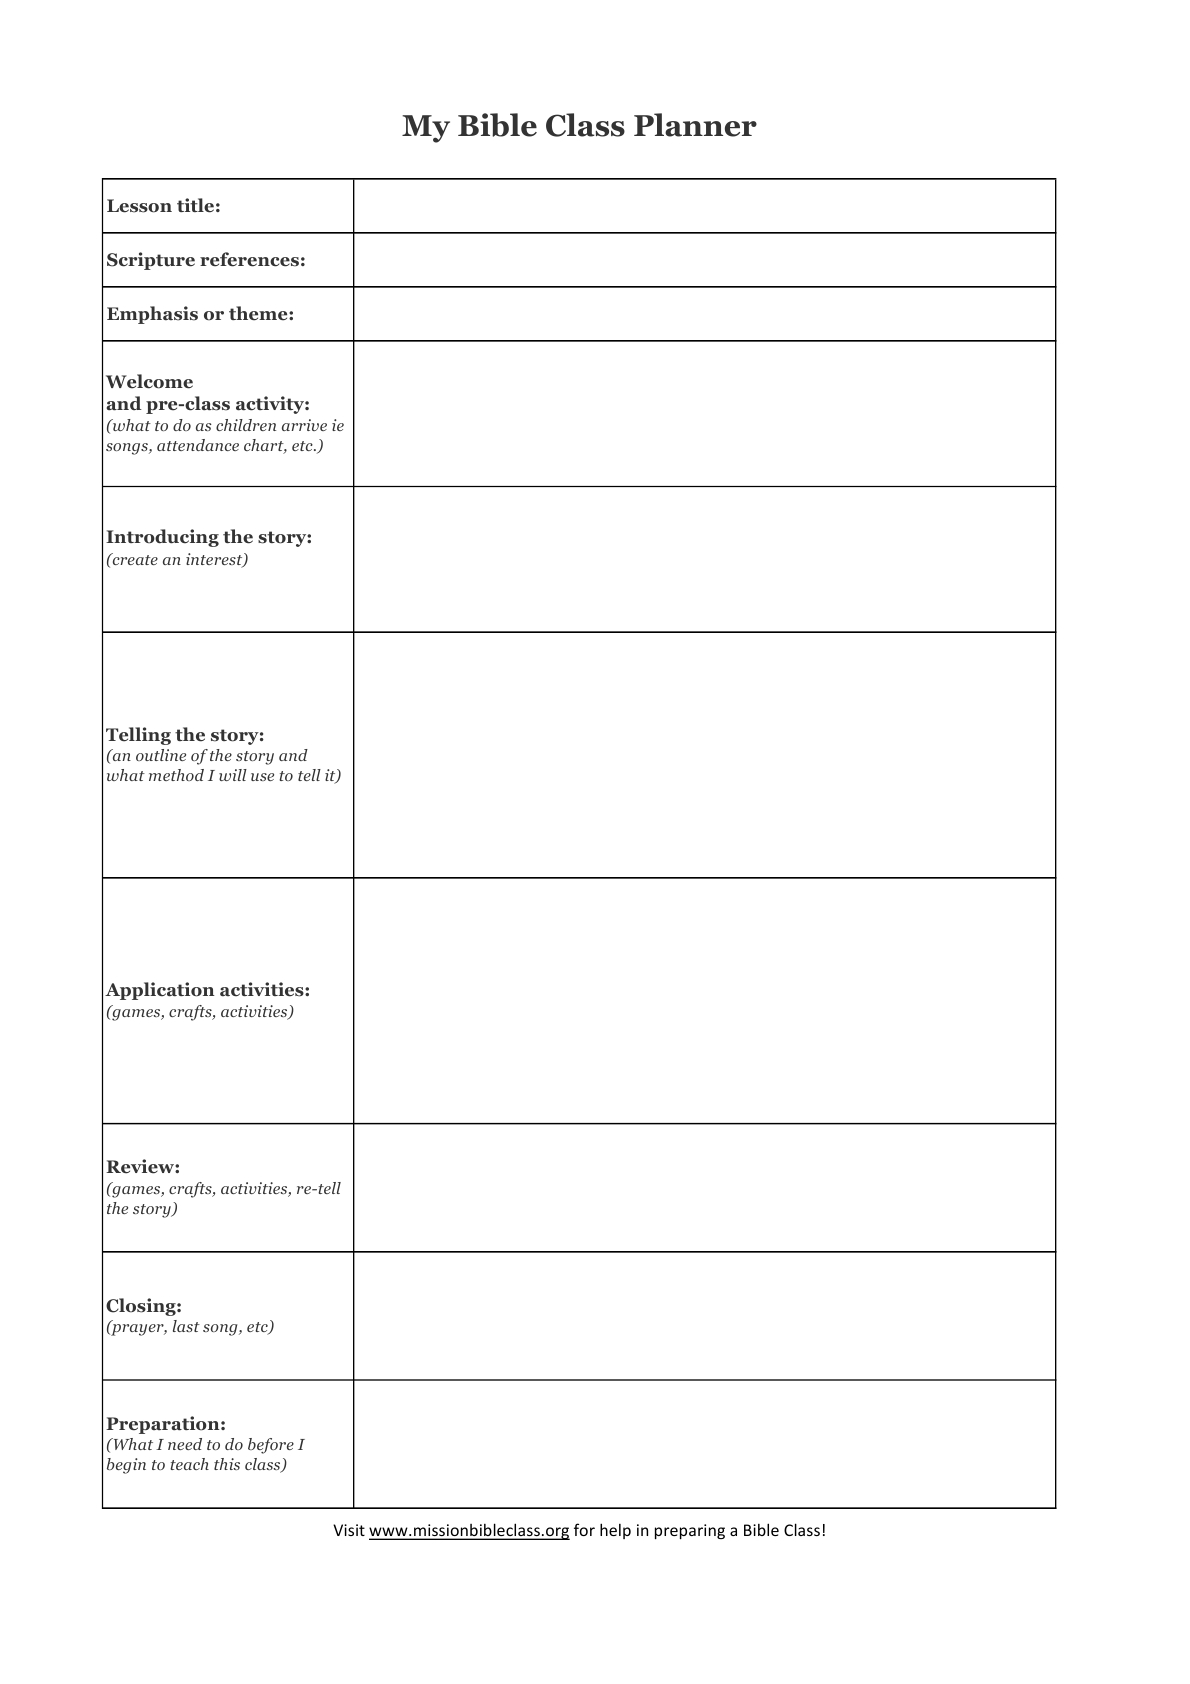 Blank Lesson Plan Templates To Print | Lesson Planning | Blank - Free Printable Bible Lessons For Youth